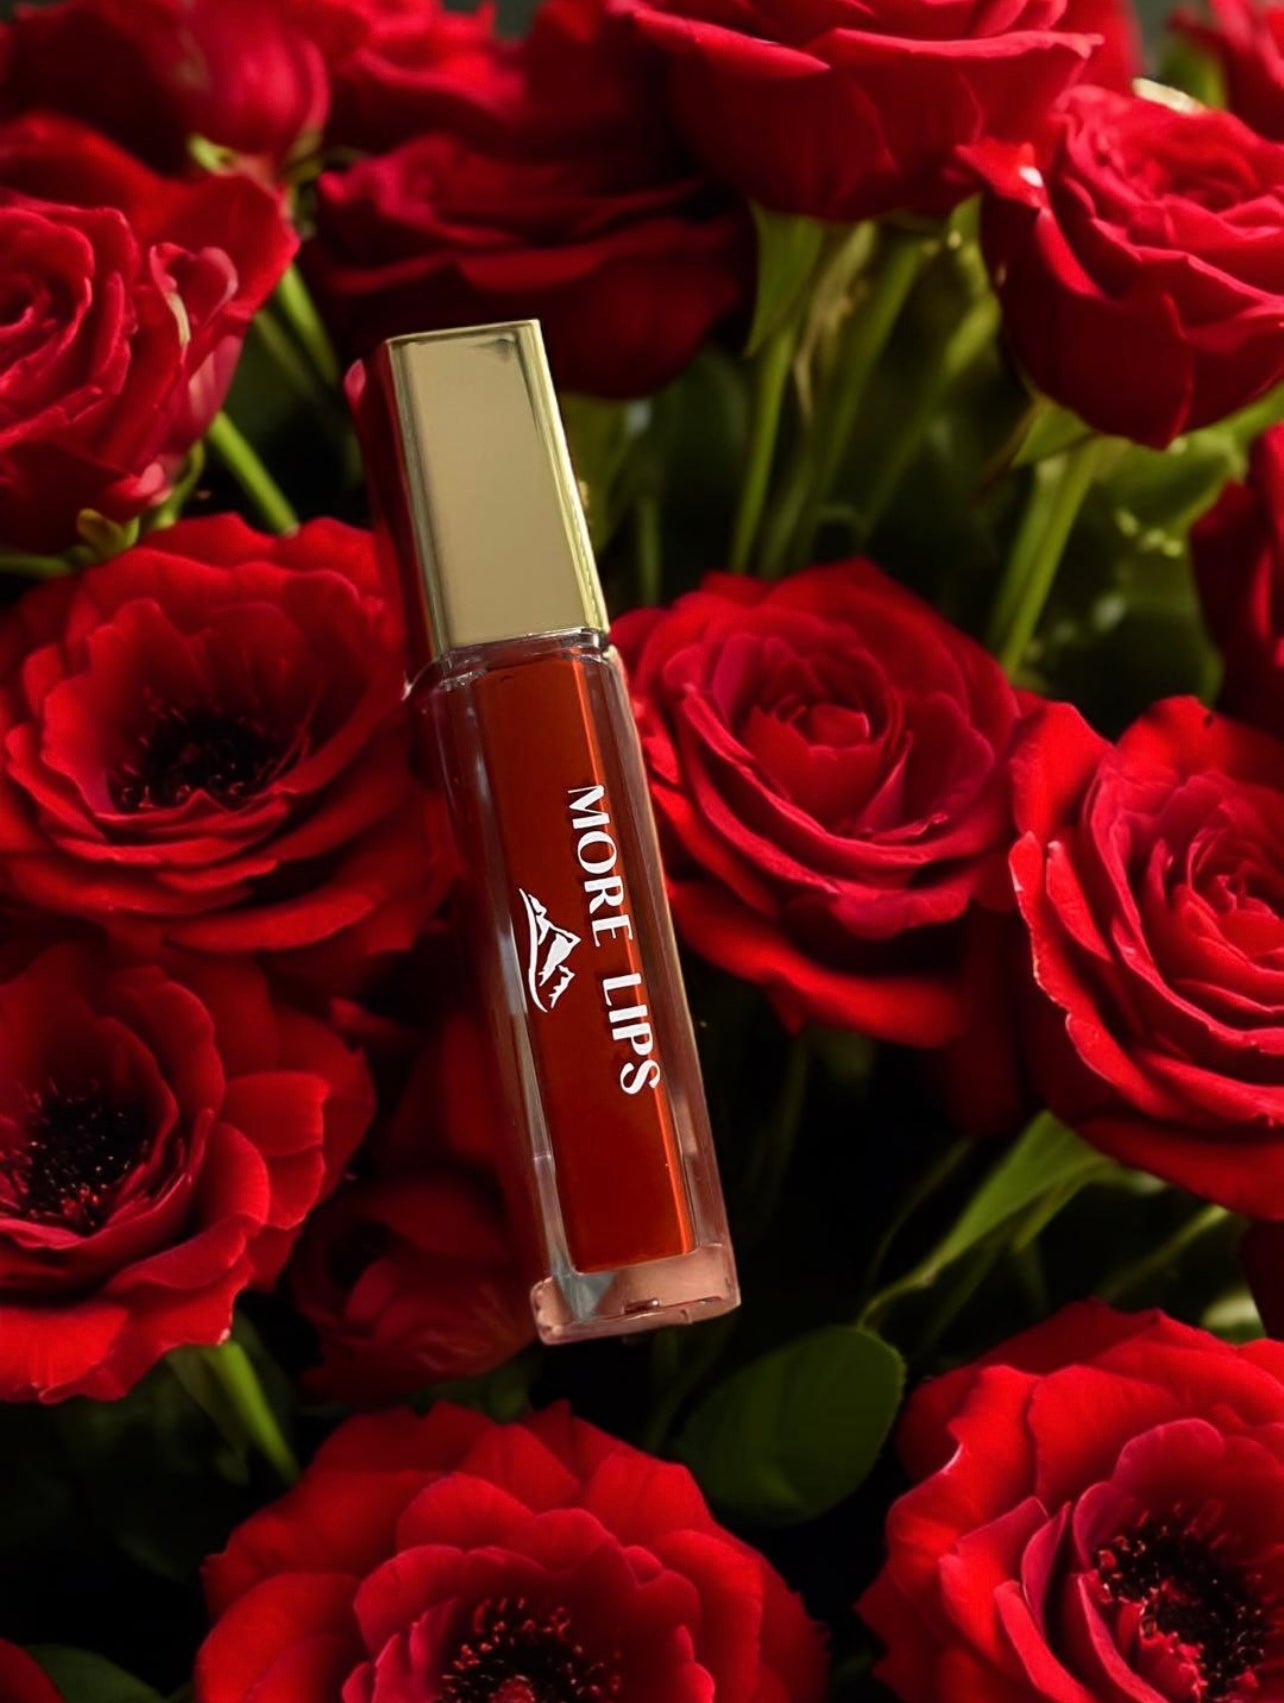 High-Shine Vegan Lip Gloss in Crimson Red, providing a vibrant red color with a glossy shine